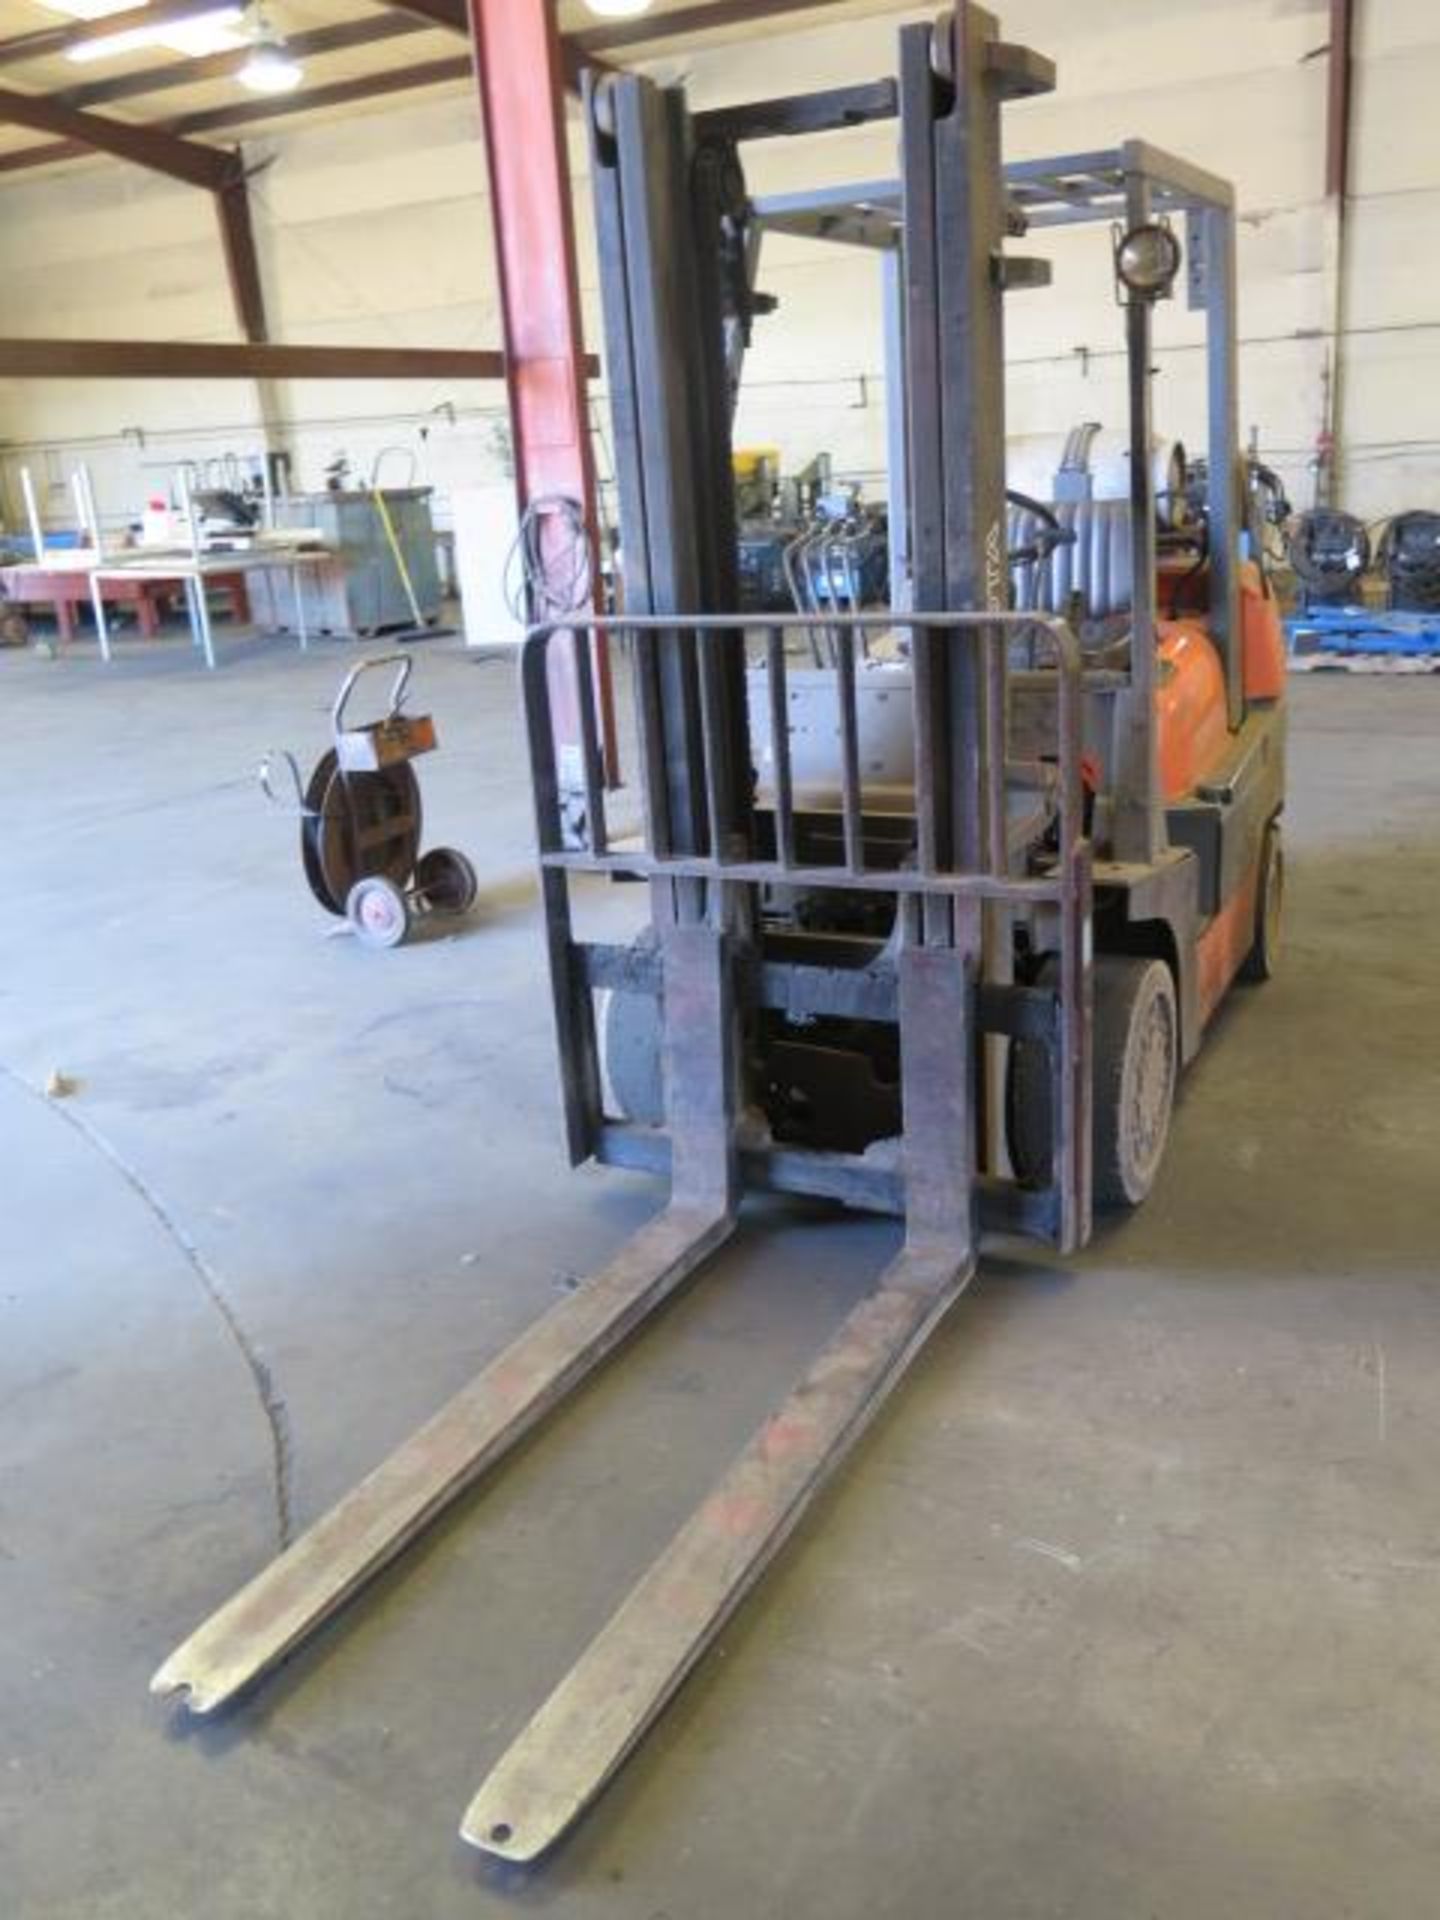 Toyota 52-6FGCU35 8000 Lb Cap LPG Forklift s/n 60547 w/ 2-Stage Mast, 131" Lift Height, SOLD AS IS - Image 2 of 13